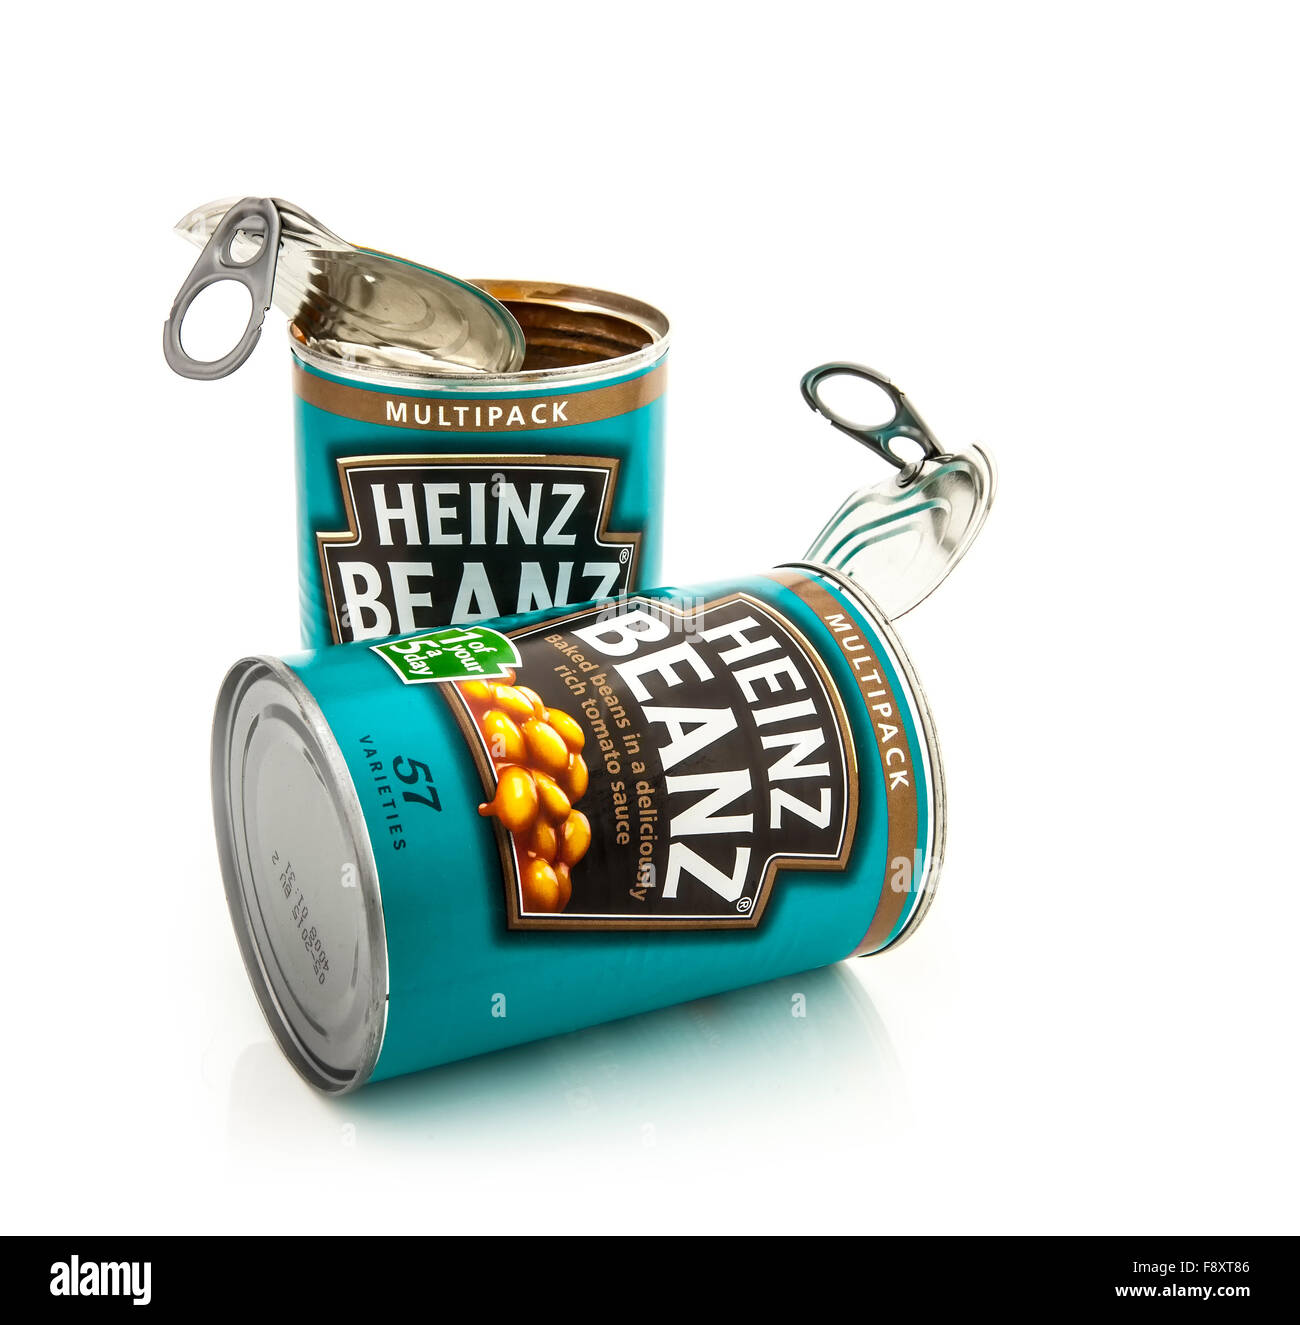 Two Cans of Heinz Beanz baked beans in tomato sauce isolated on white background. Stock Photo